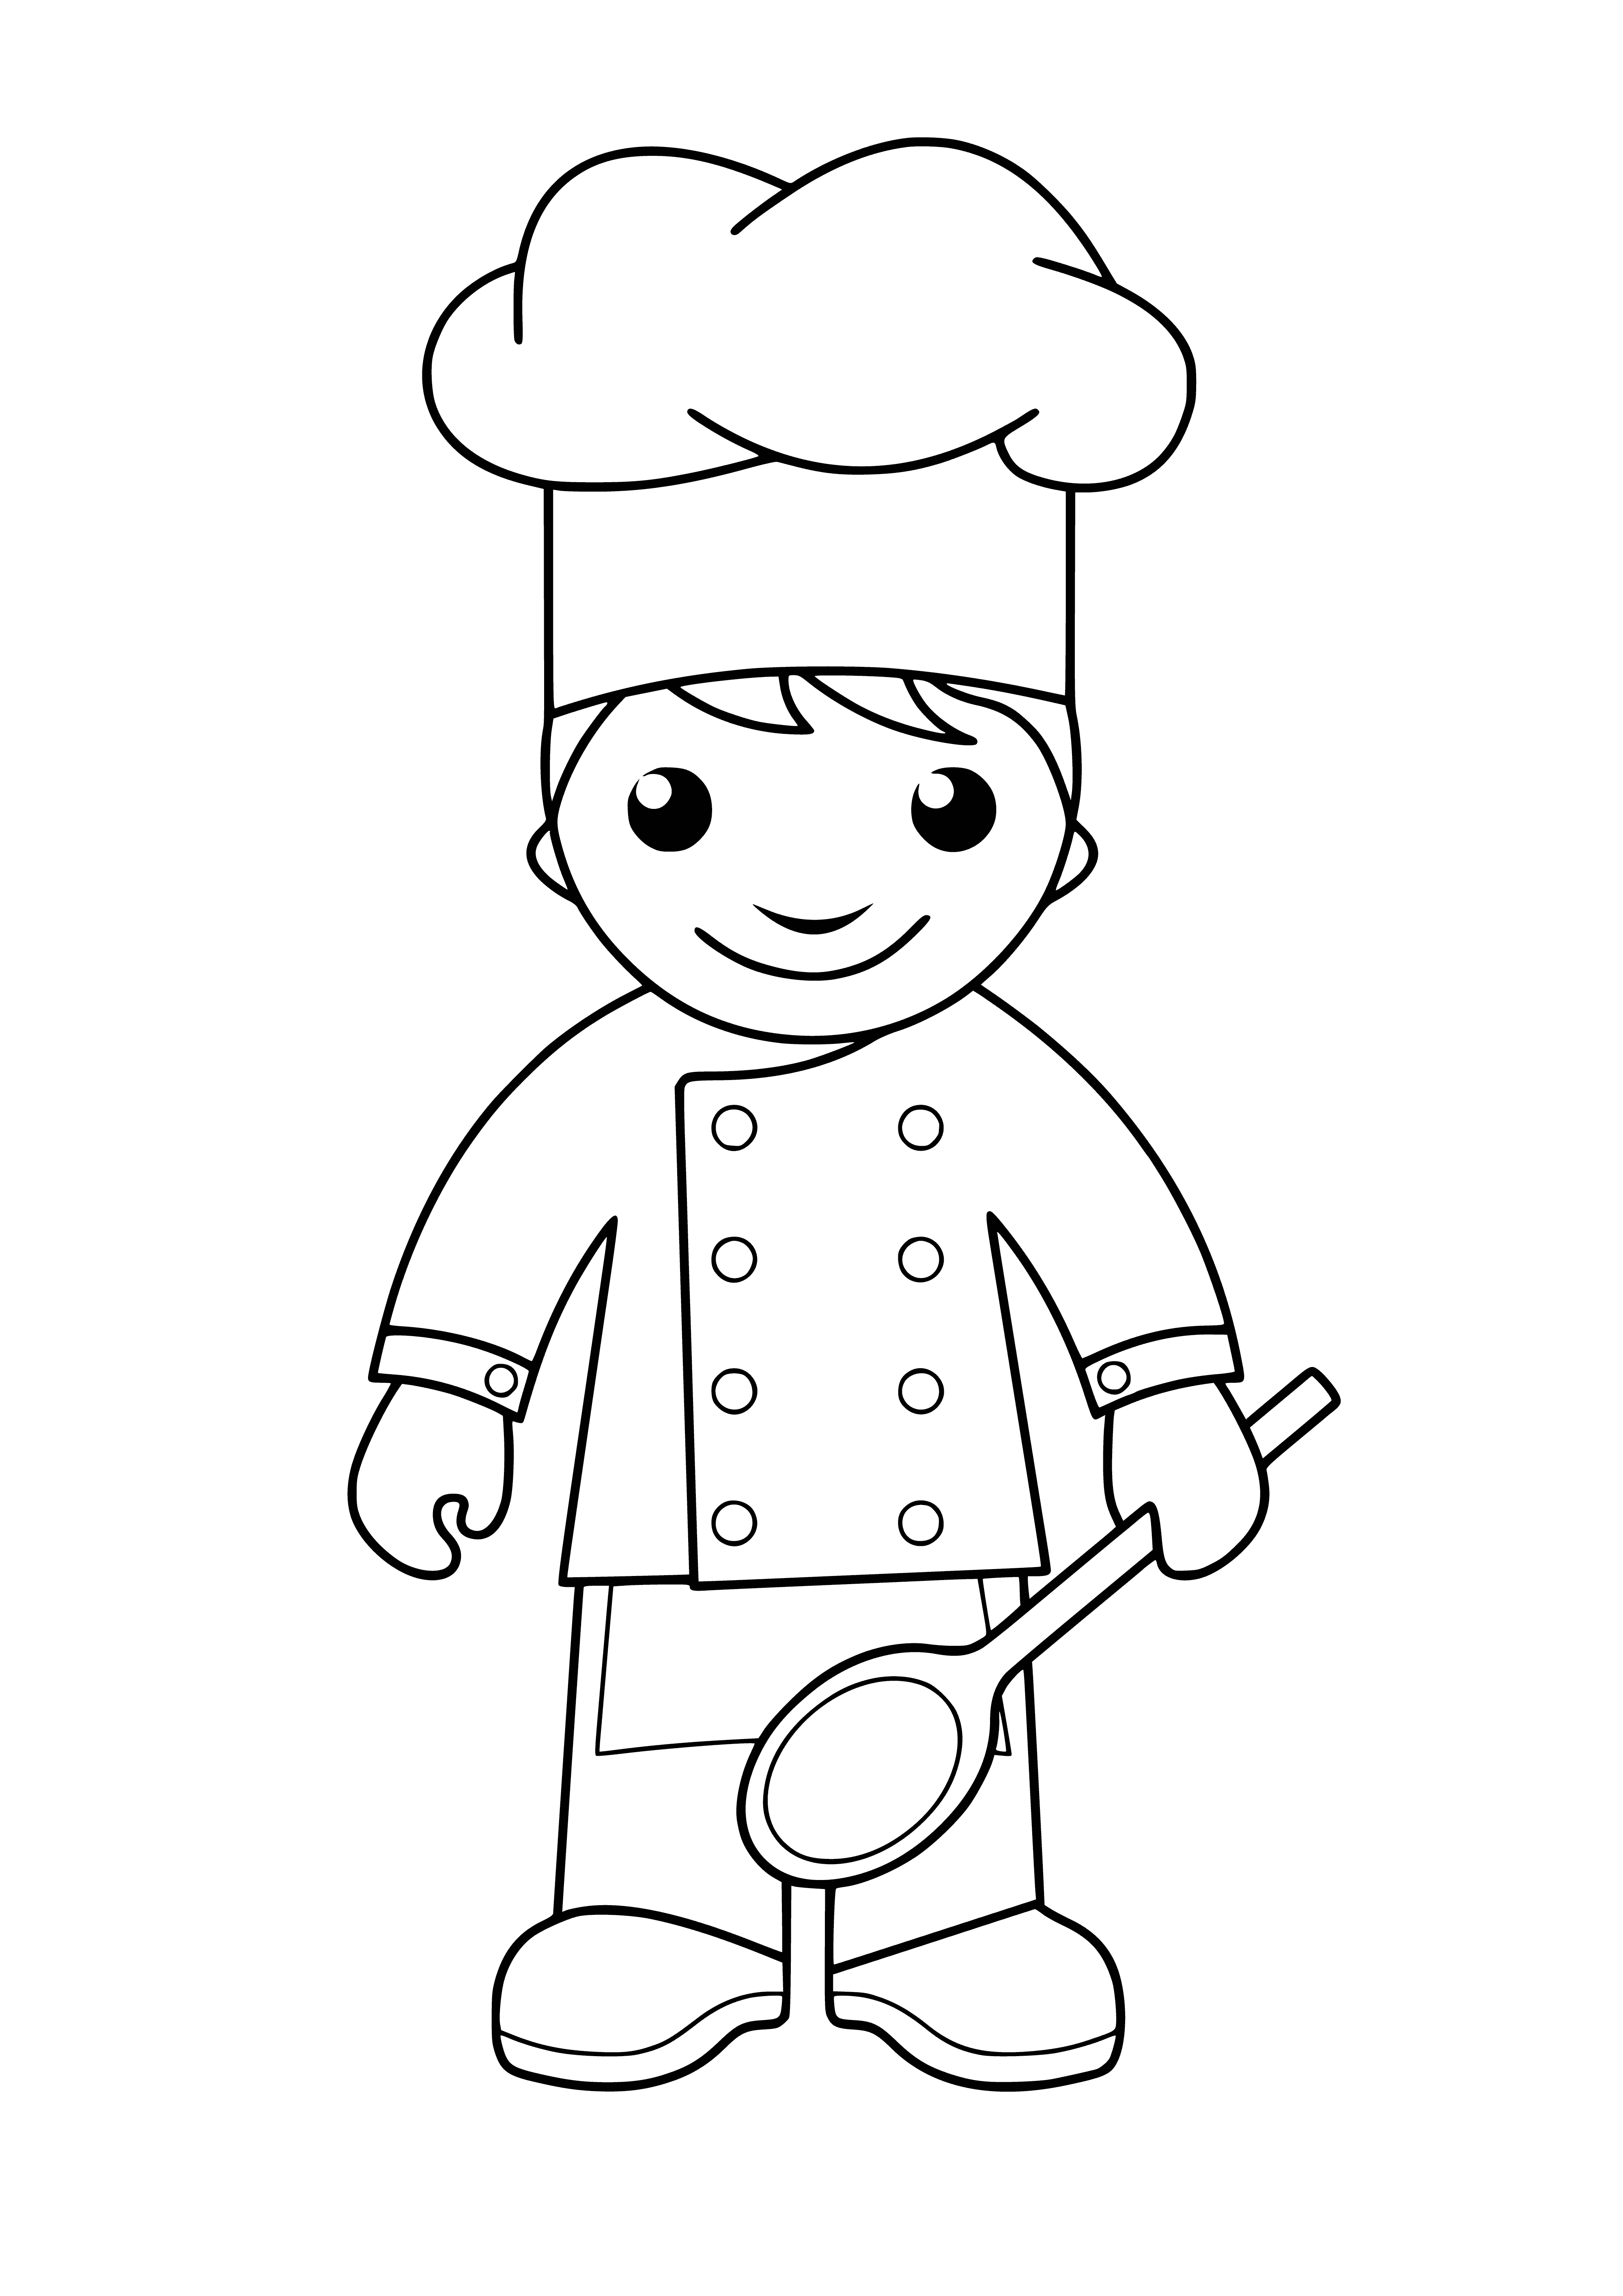 coloring page: Cook in kitchen wears hat & apron, holds spoon, has mustache & beard & stands before stove with pot.